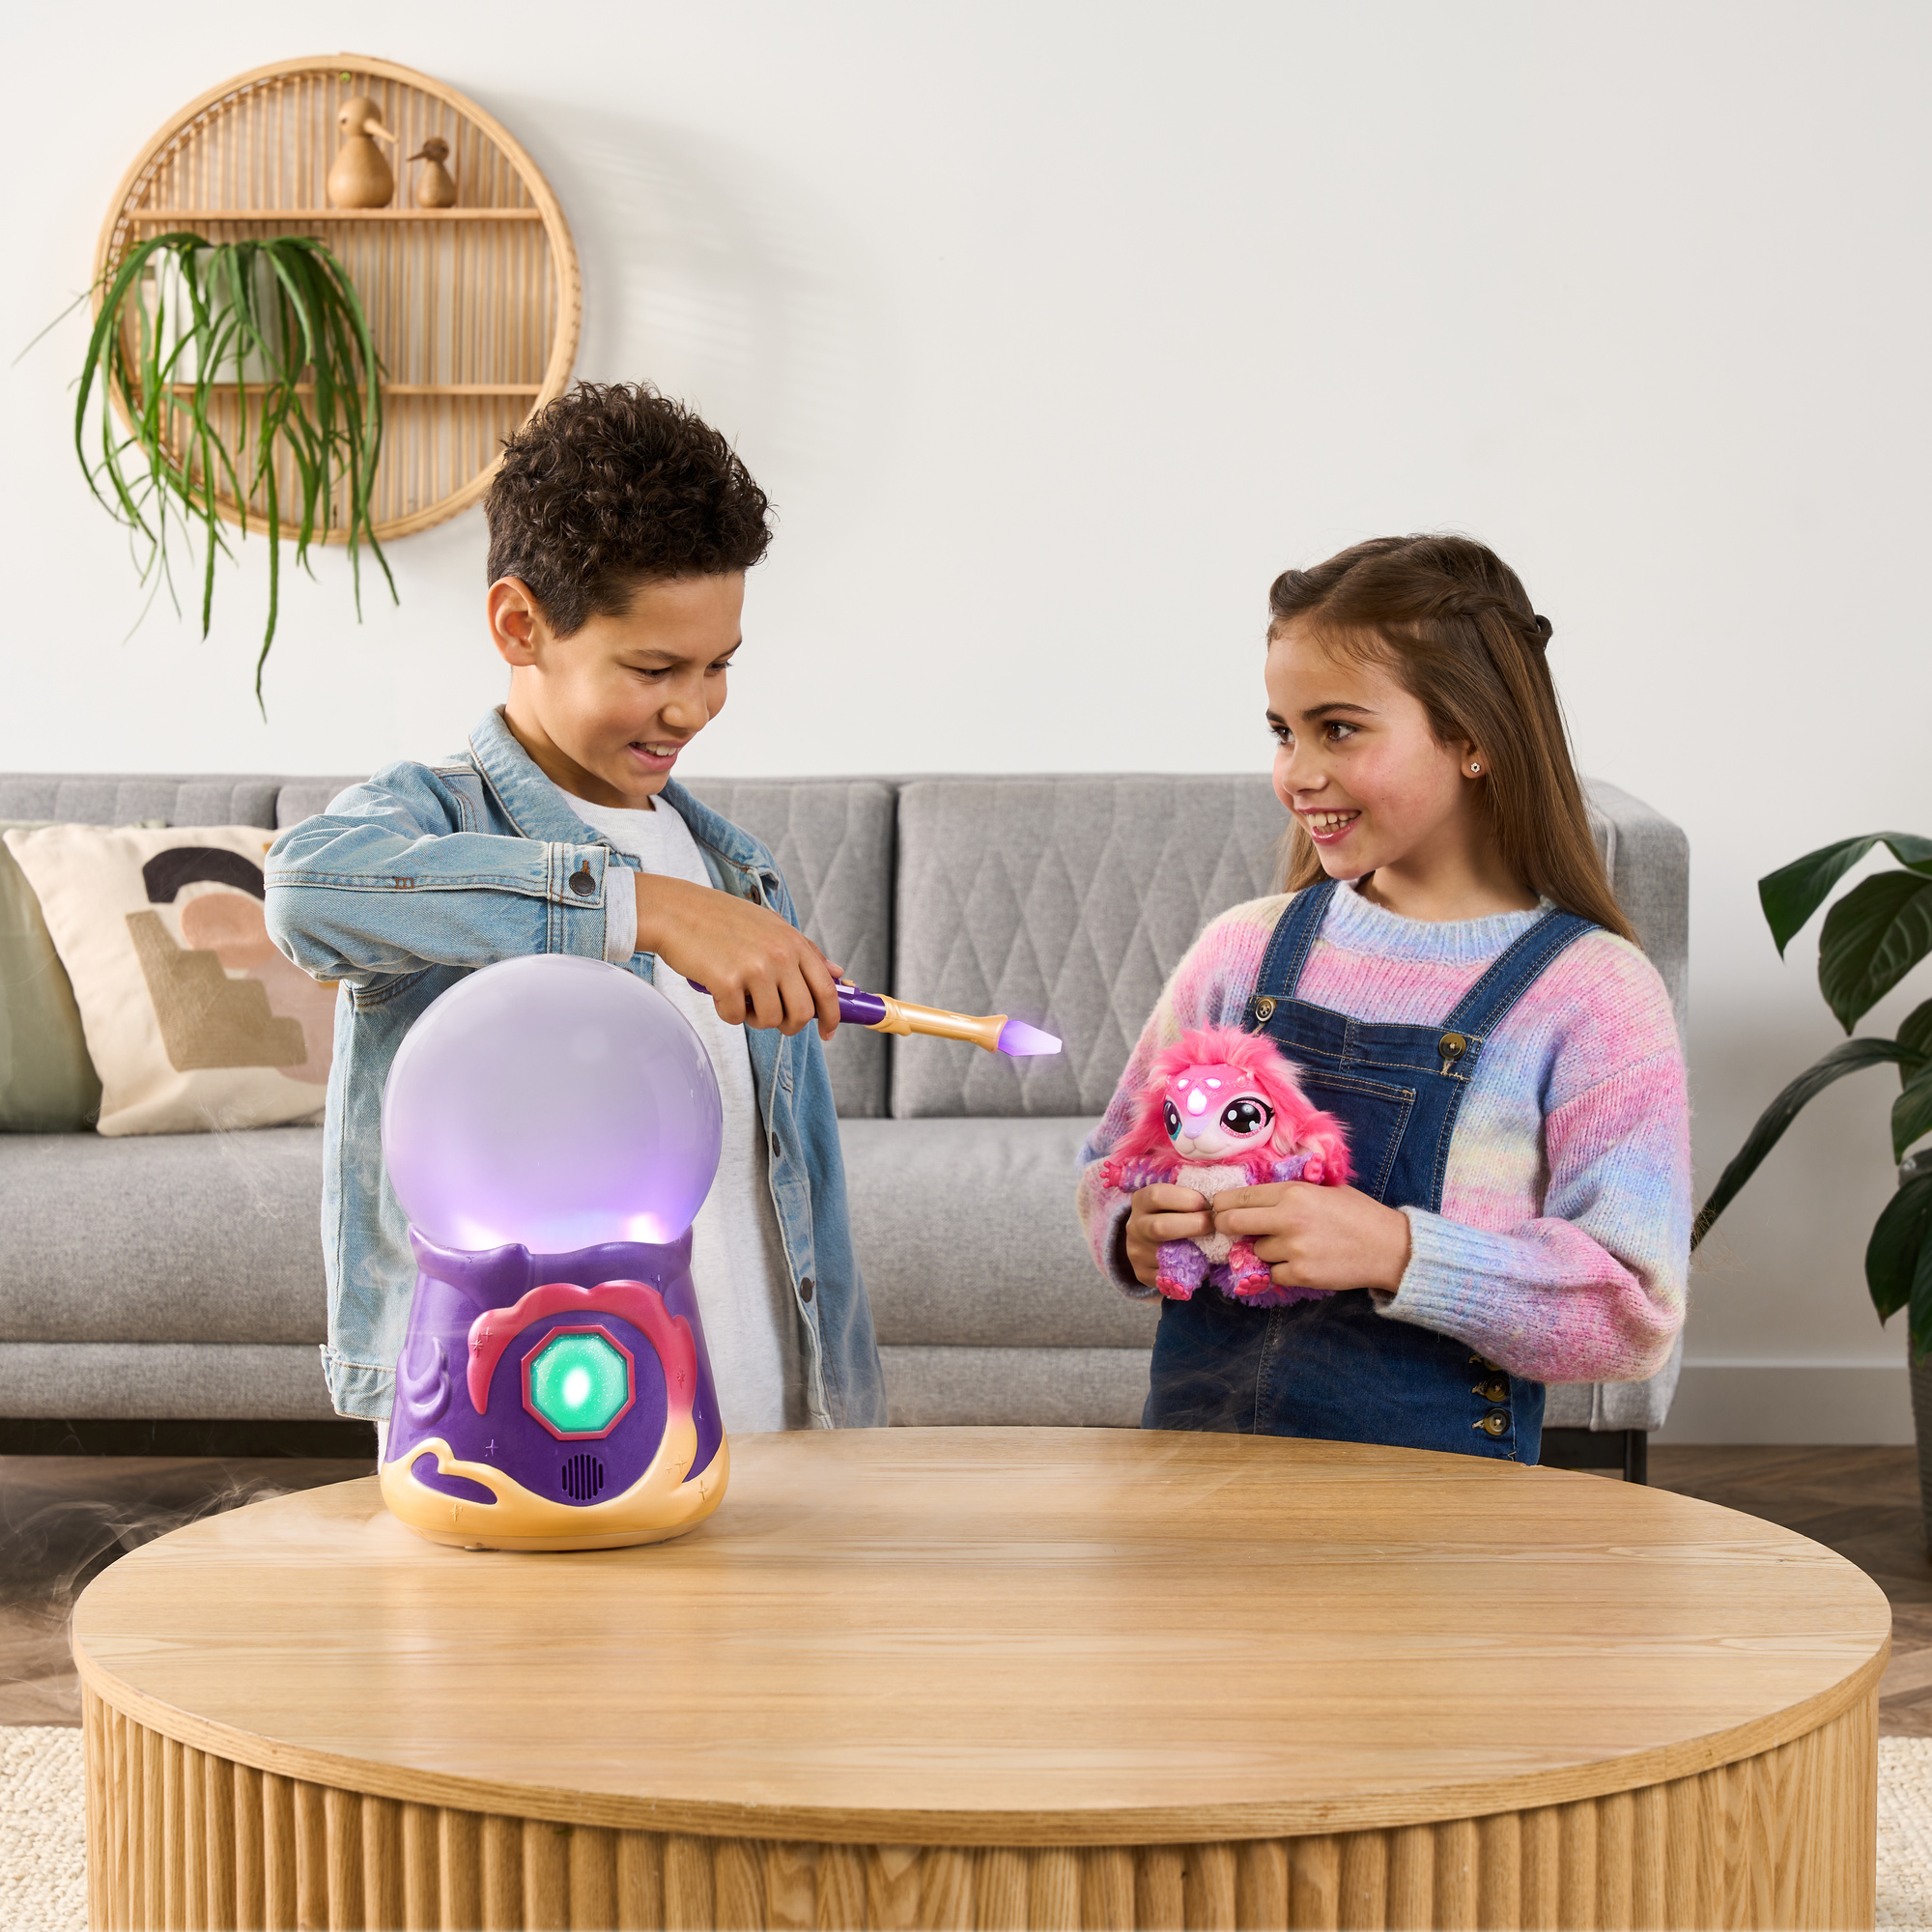 Magic Mixies Magical Misting Crystal Ball with Interactive 8 inch Pink Plush Toy Ages 5+ - image 13 of 18